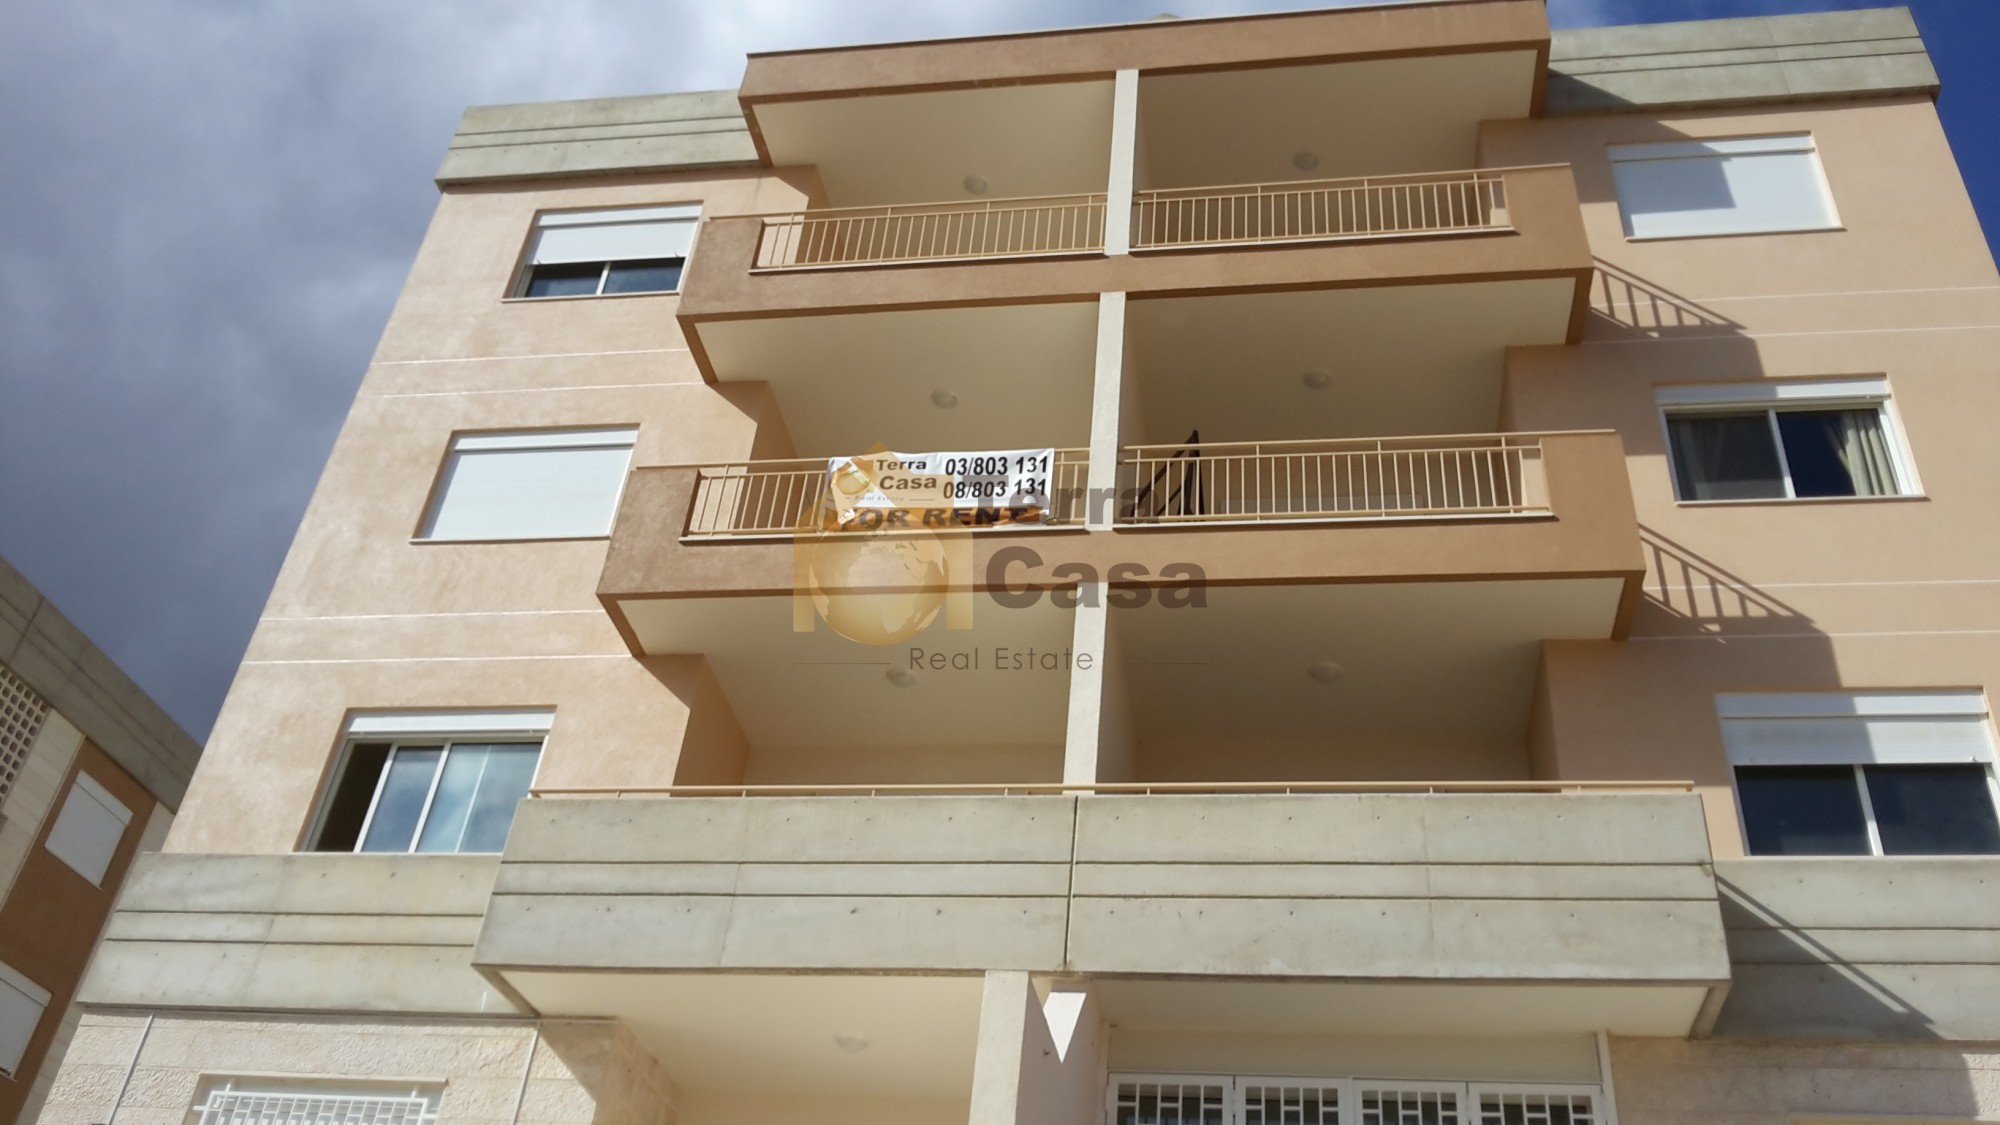 dhour zahle apartment heating and solar system installed Ref#512